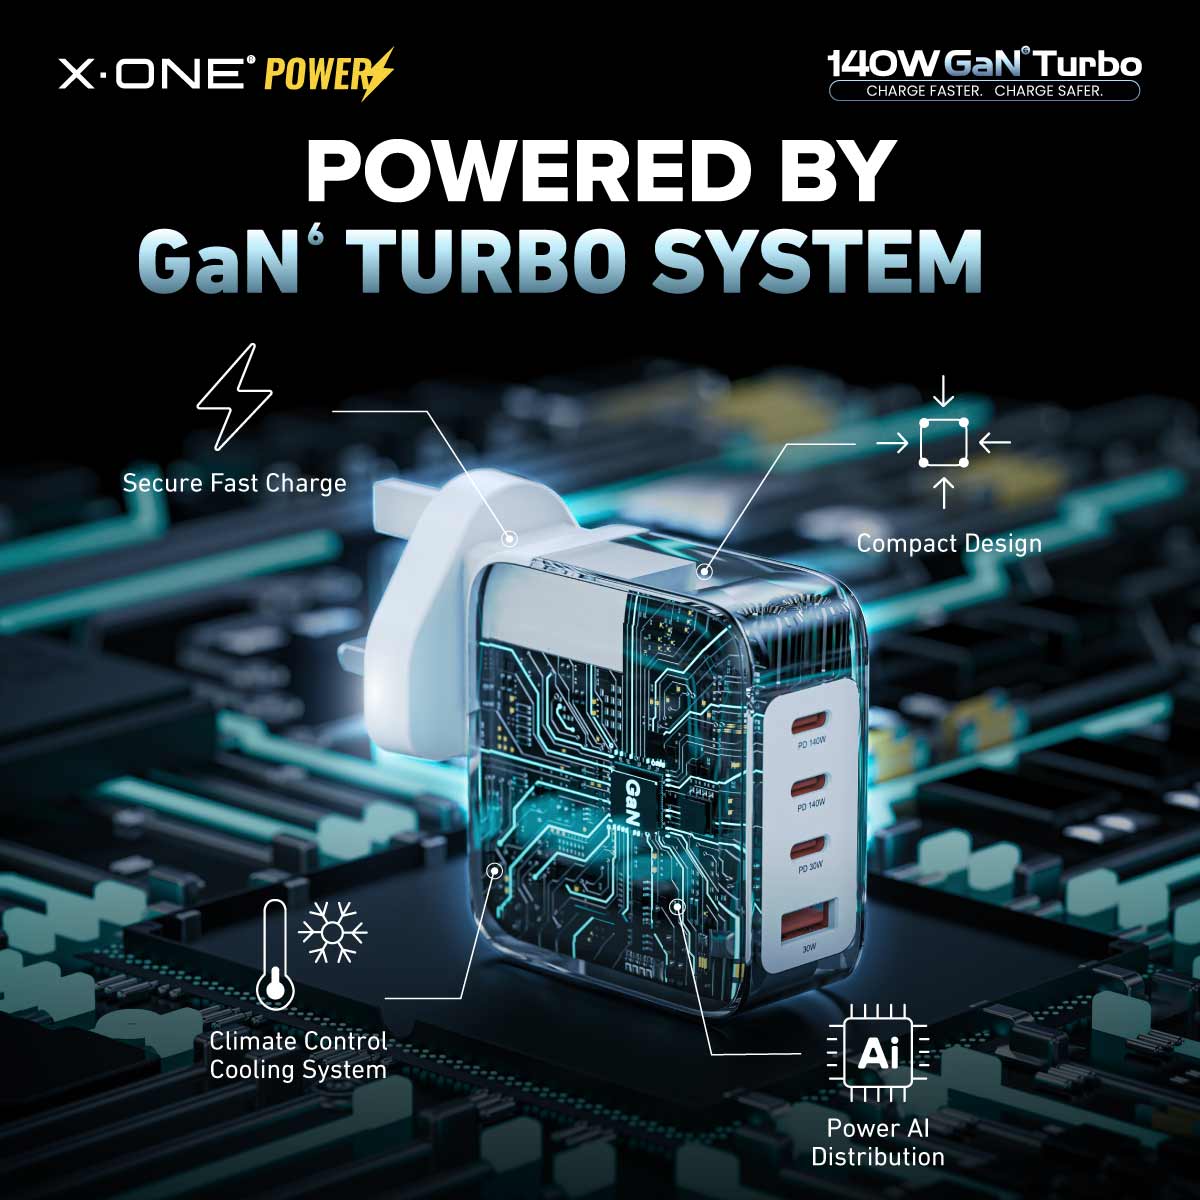 X.One® 140W GaN 6 Turbo Ultra Fast Charger (4-Ports)